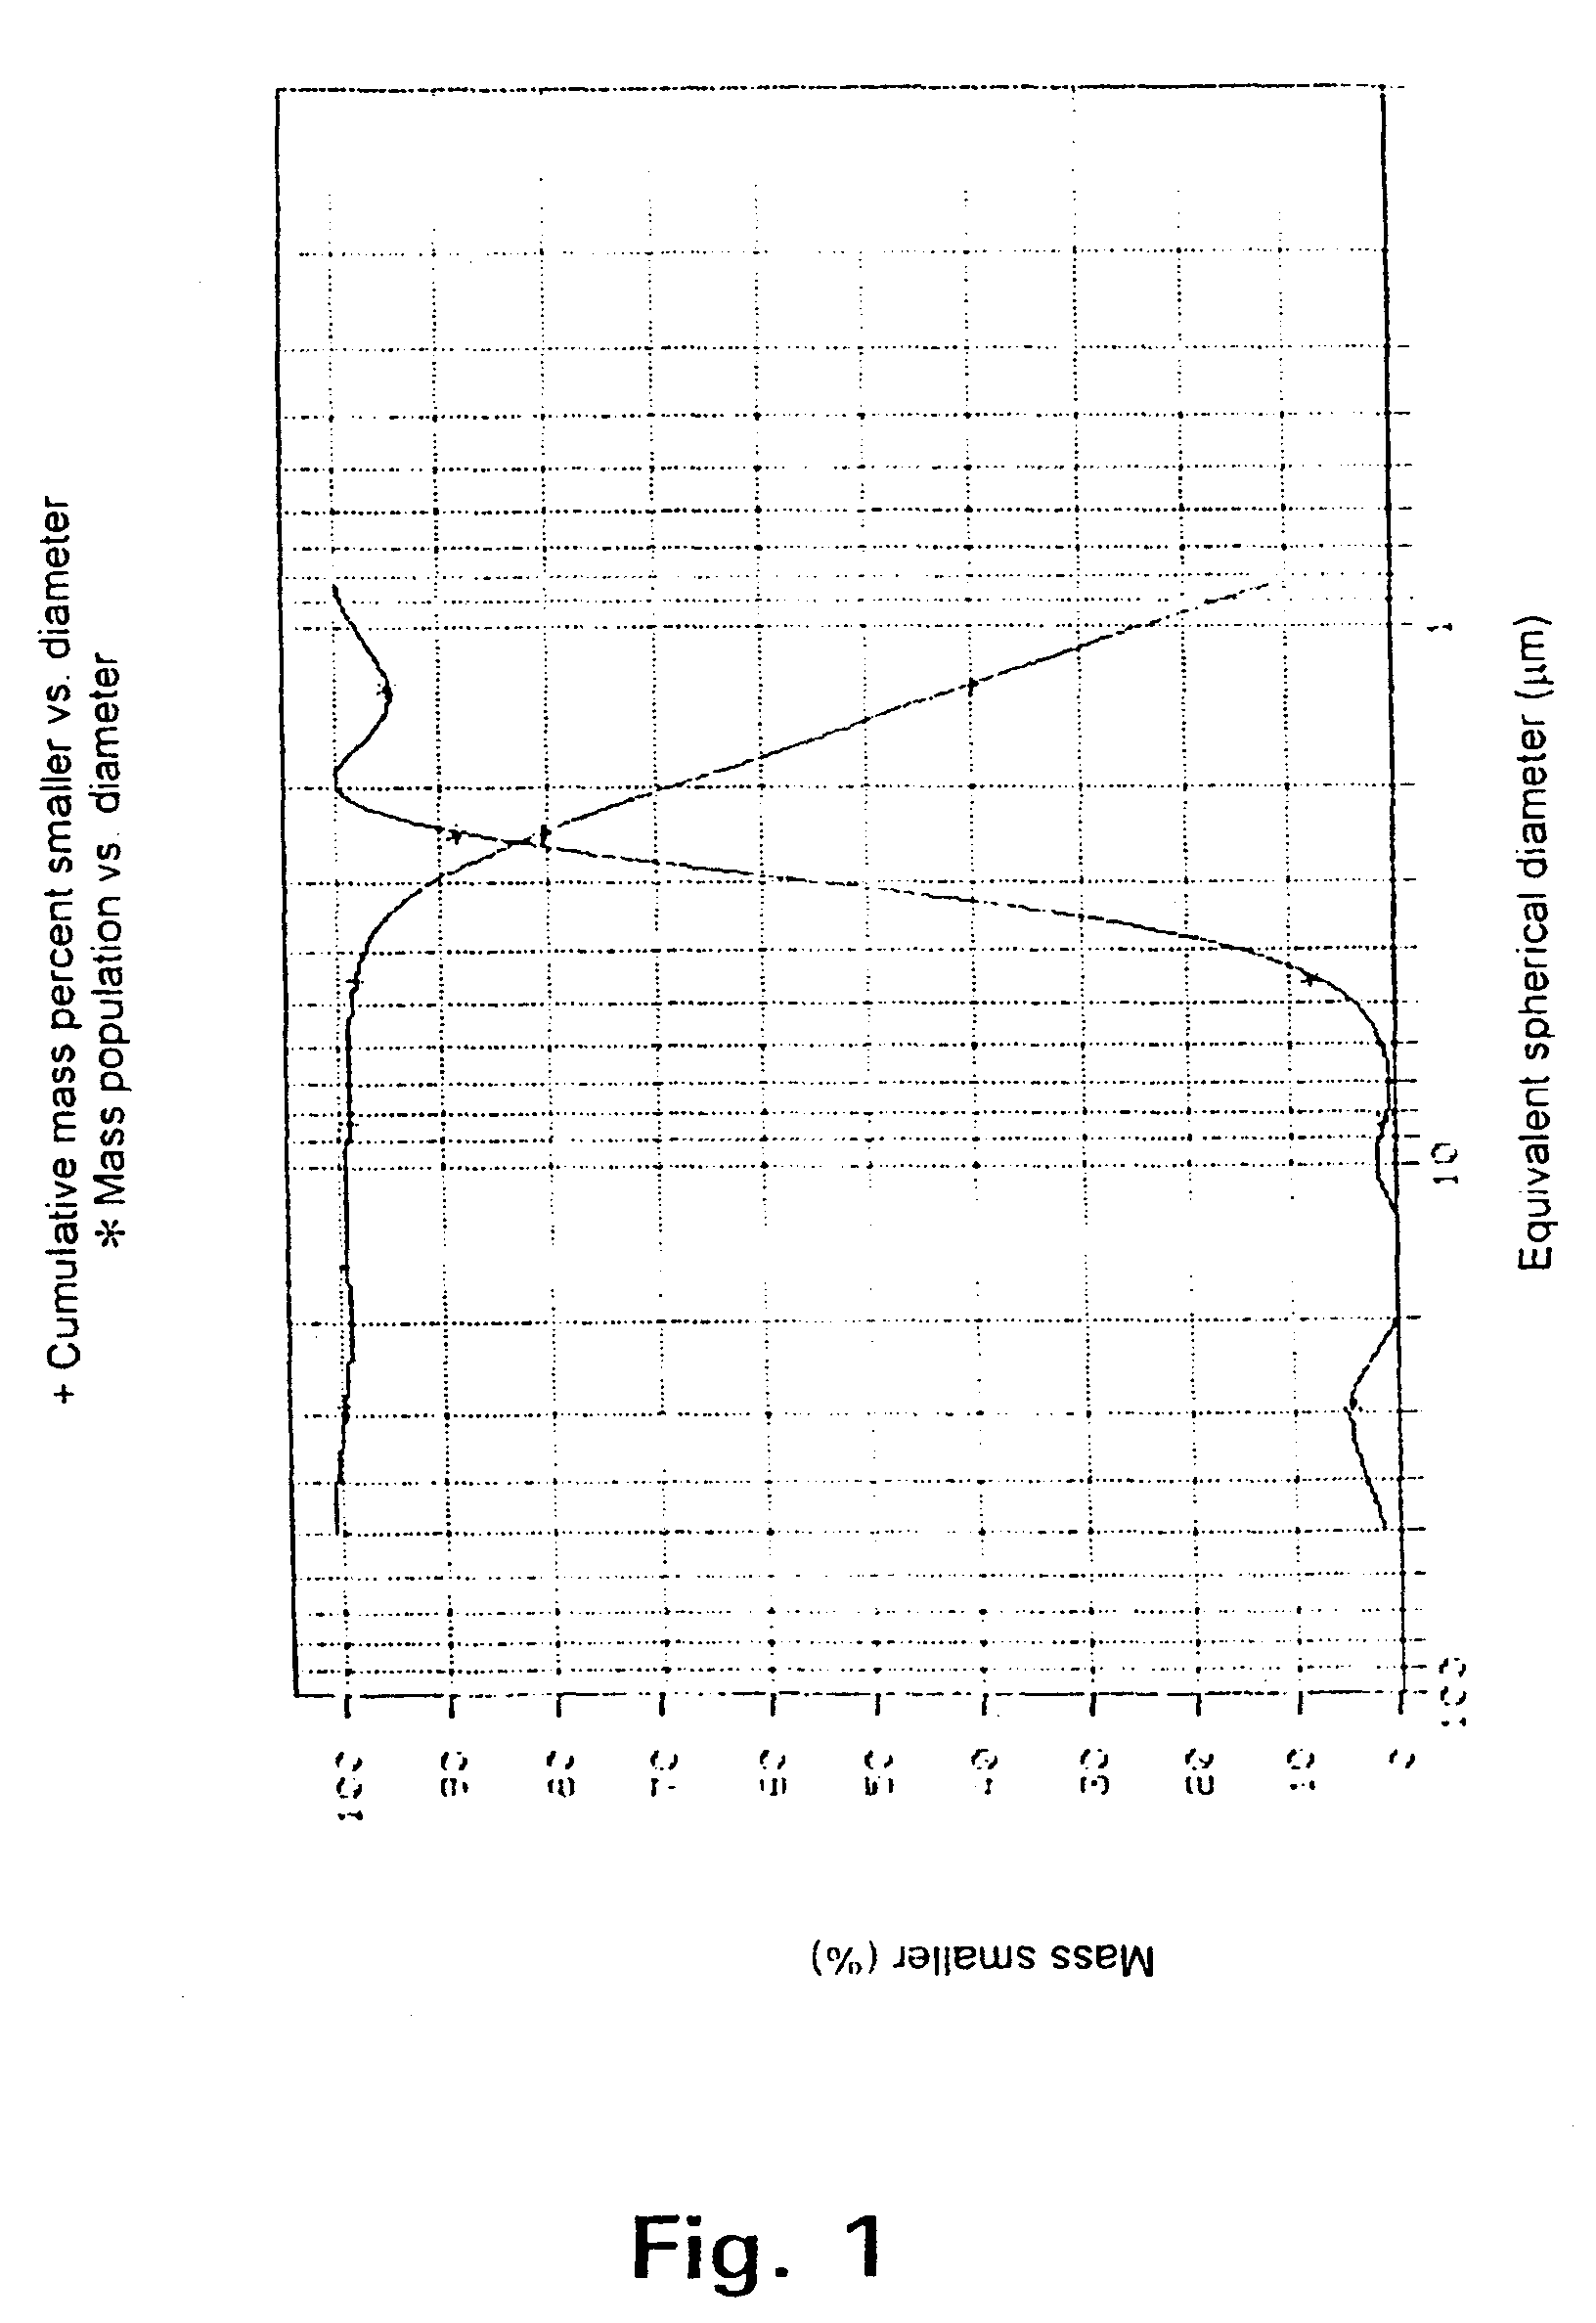 Process for regulating the porosity and printing properties of paper by use of colloidal precipitated calcium carbonate, and paper containing such colloidal precipitated calcium carbonate